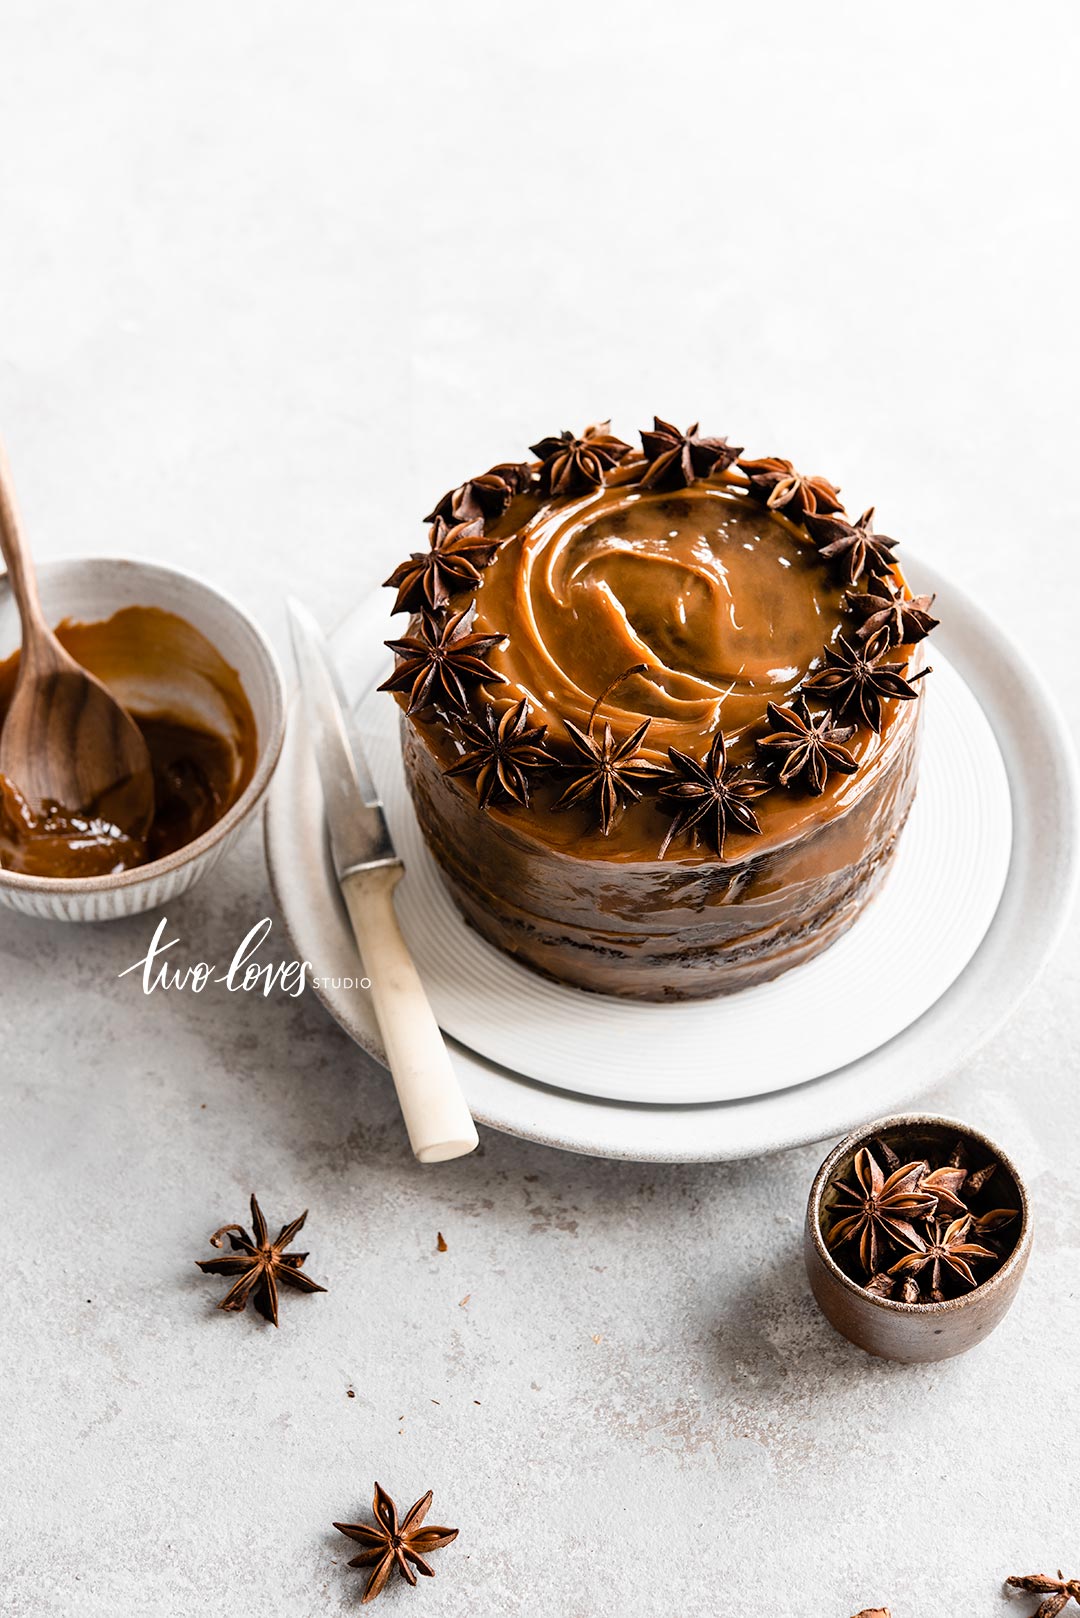 A caramel cake topped with a star anise ring